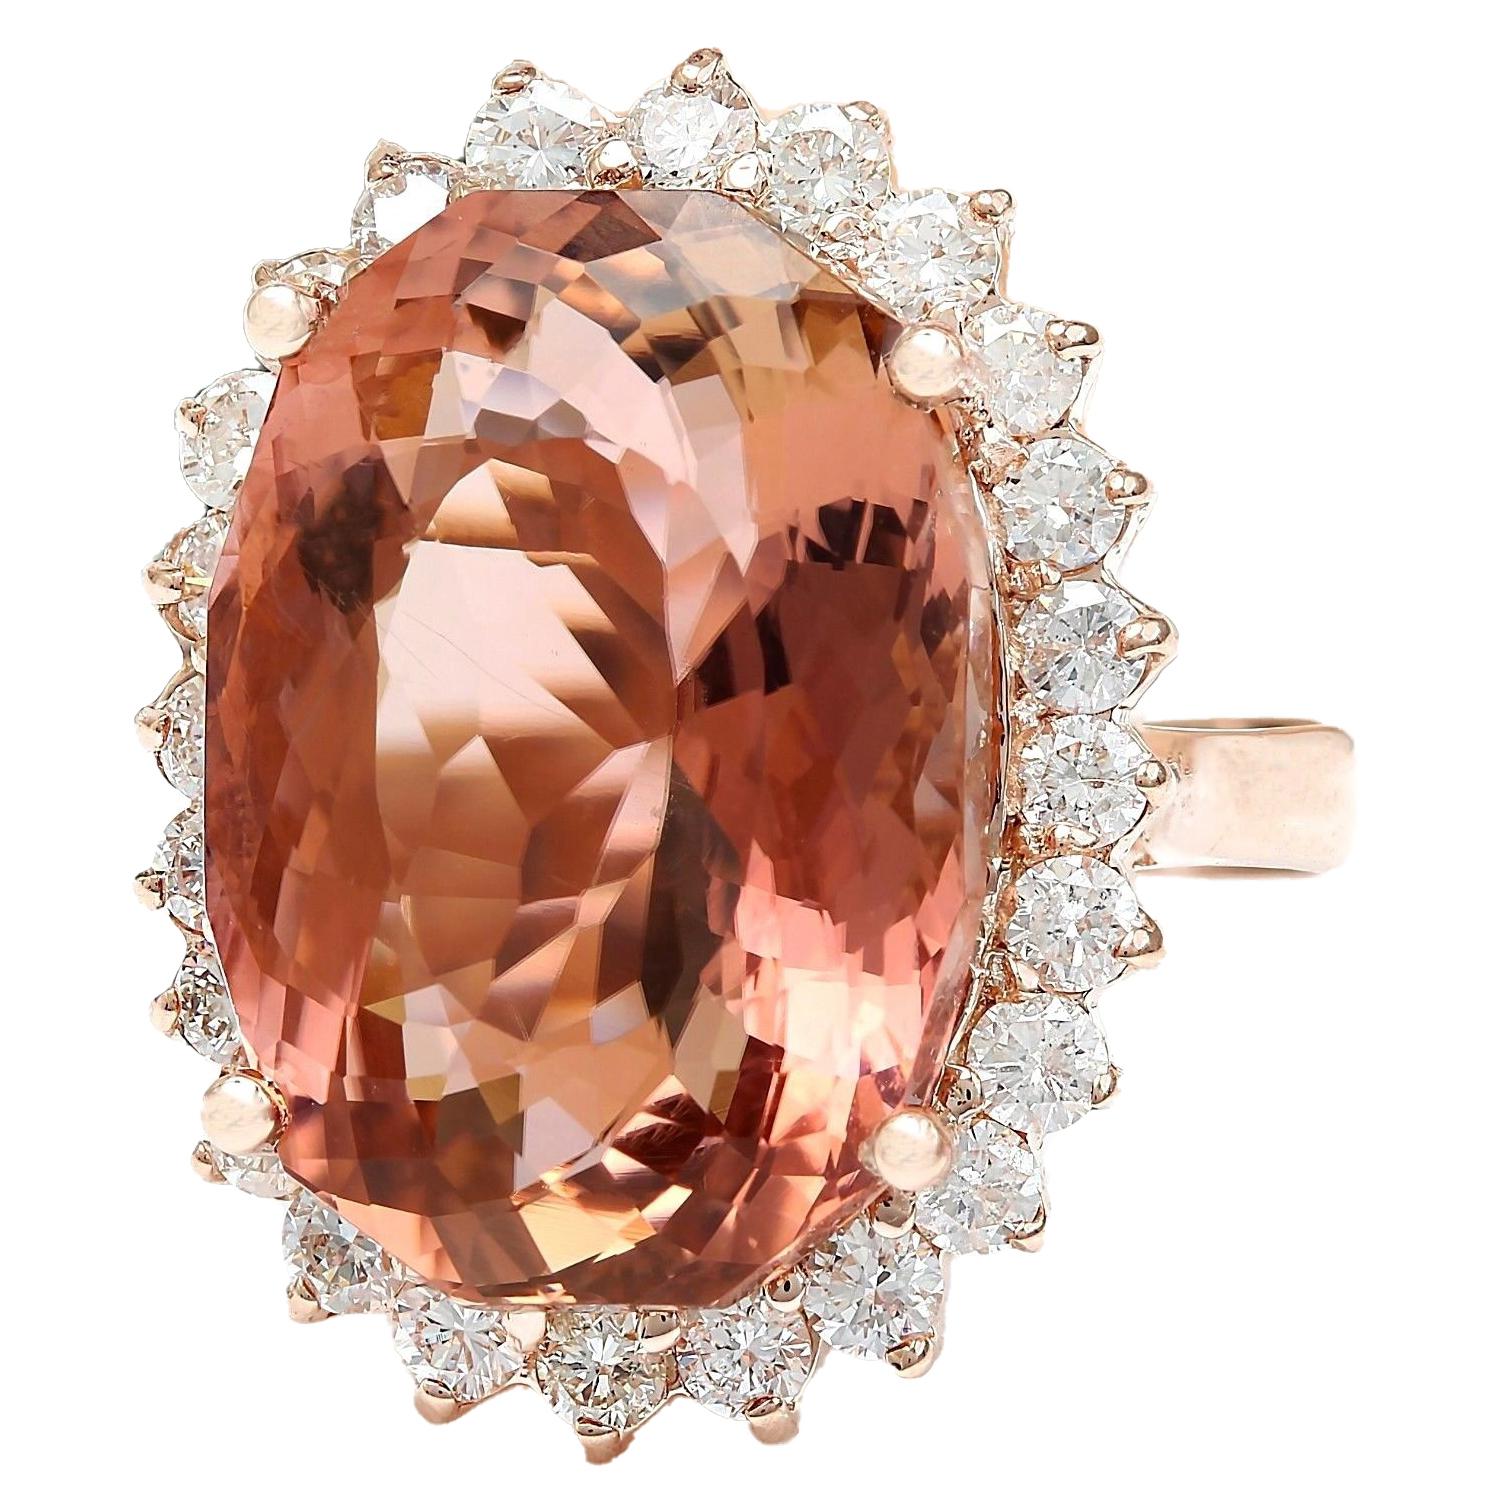 16.60 Carat Natural Morganite 14K Solid Rose Gold Diamond Ring
 Item Type: Ring
 Item Style: Cocktail
 Material: 14K Rose Gold
 Mainstone: Morganite
 Stone Color: Peach
 Stone Weight: 15.42 Carat
 Stone Shape: Oval
 Stone Quantity: 1
 Stone